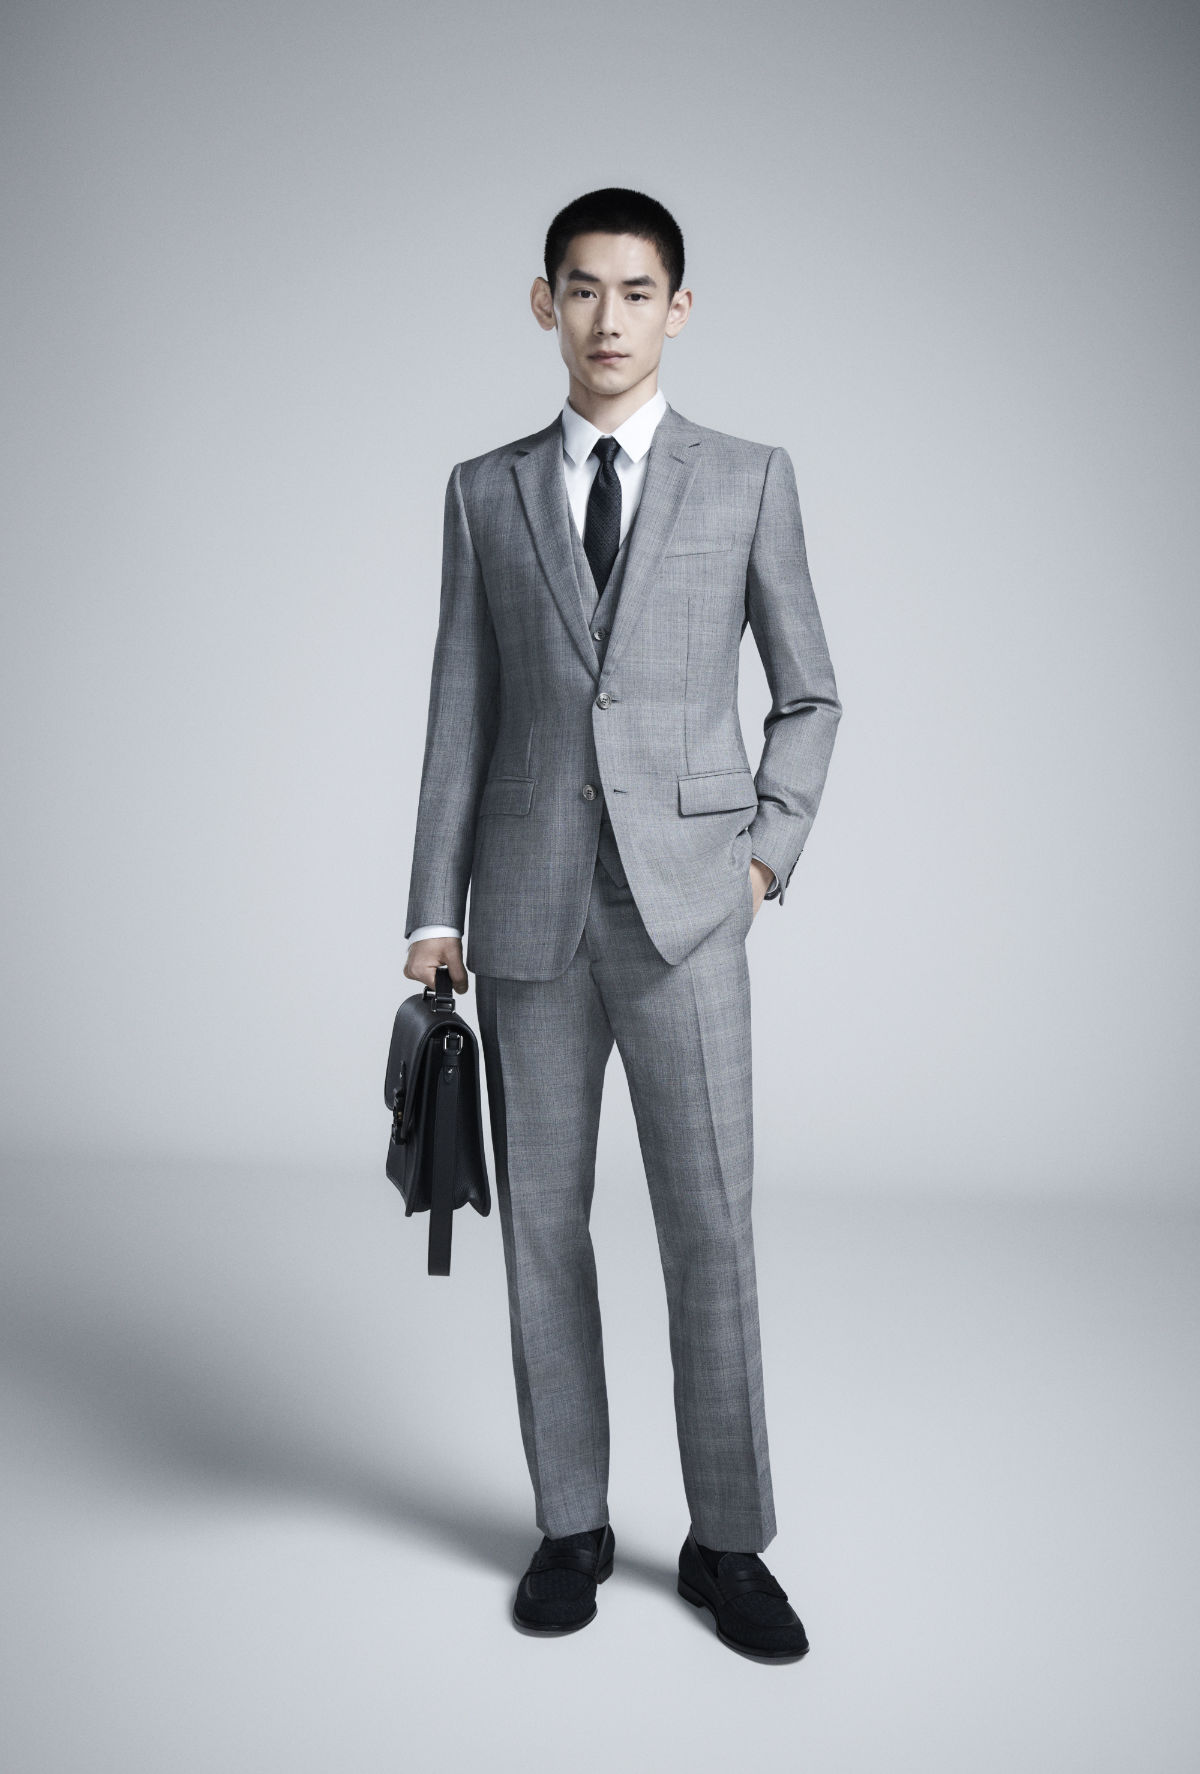 Dior Presents Its New Men's Spring 2024 Capsule Collection: Tailoring